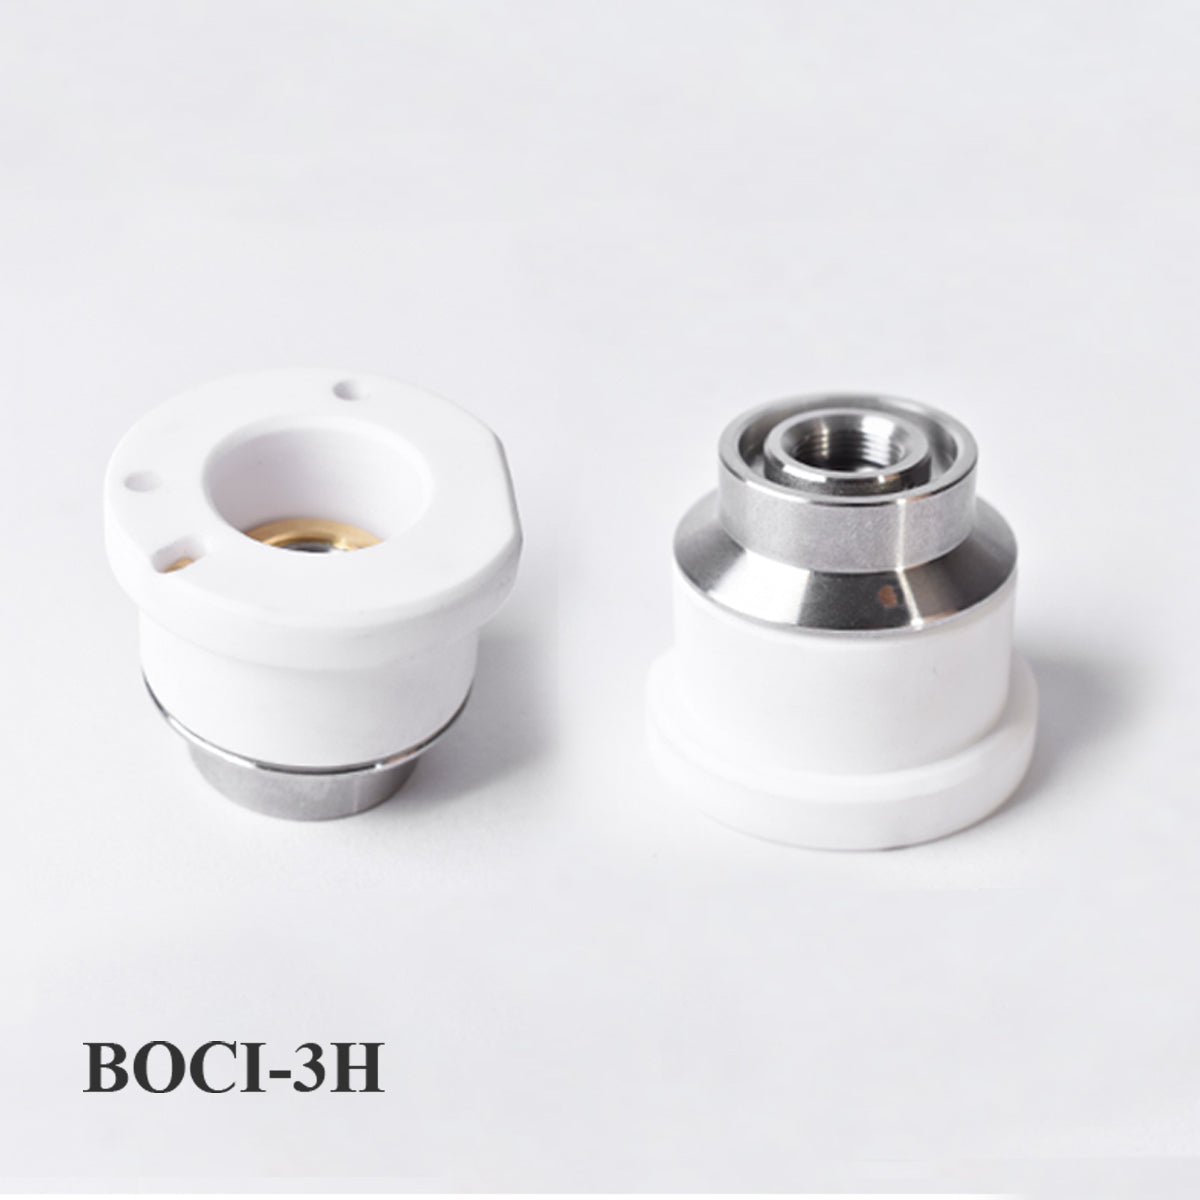 Startnow BOCI LaserMech With Hole Cutting Head Ceramic Rings M8 Nozzle Connector